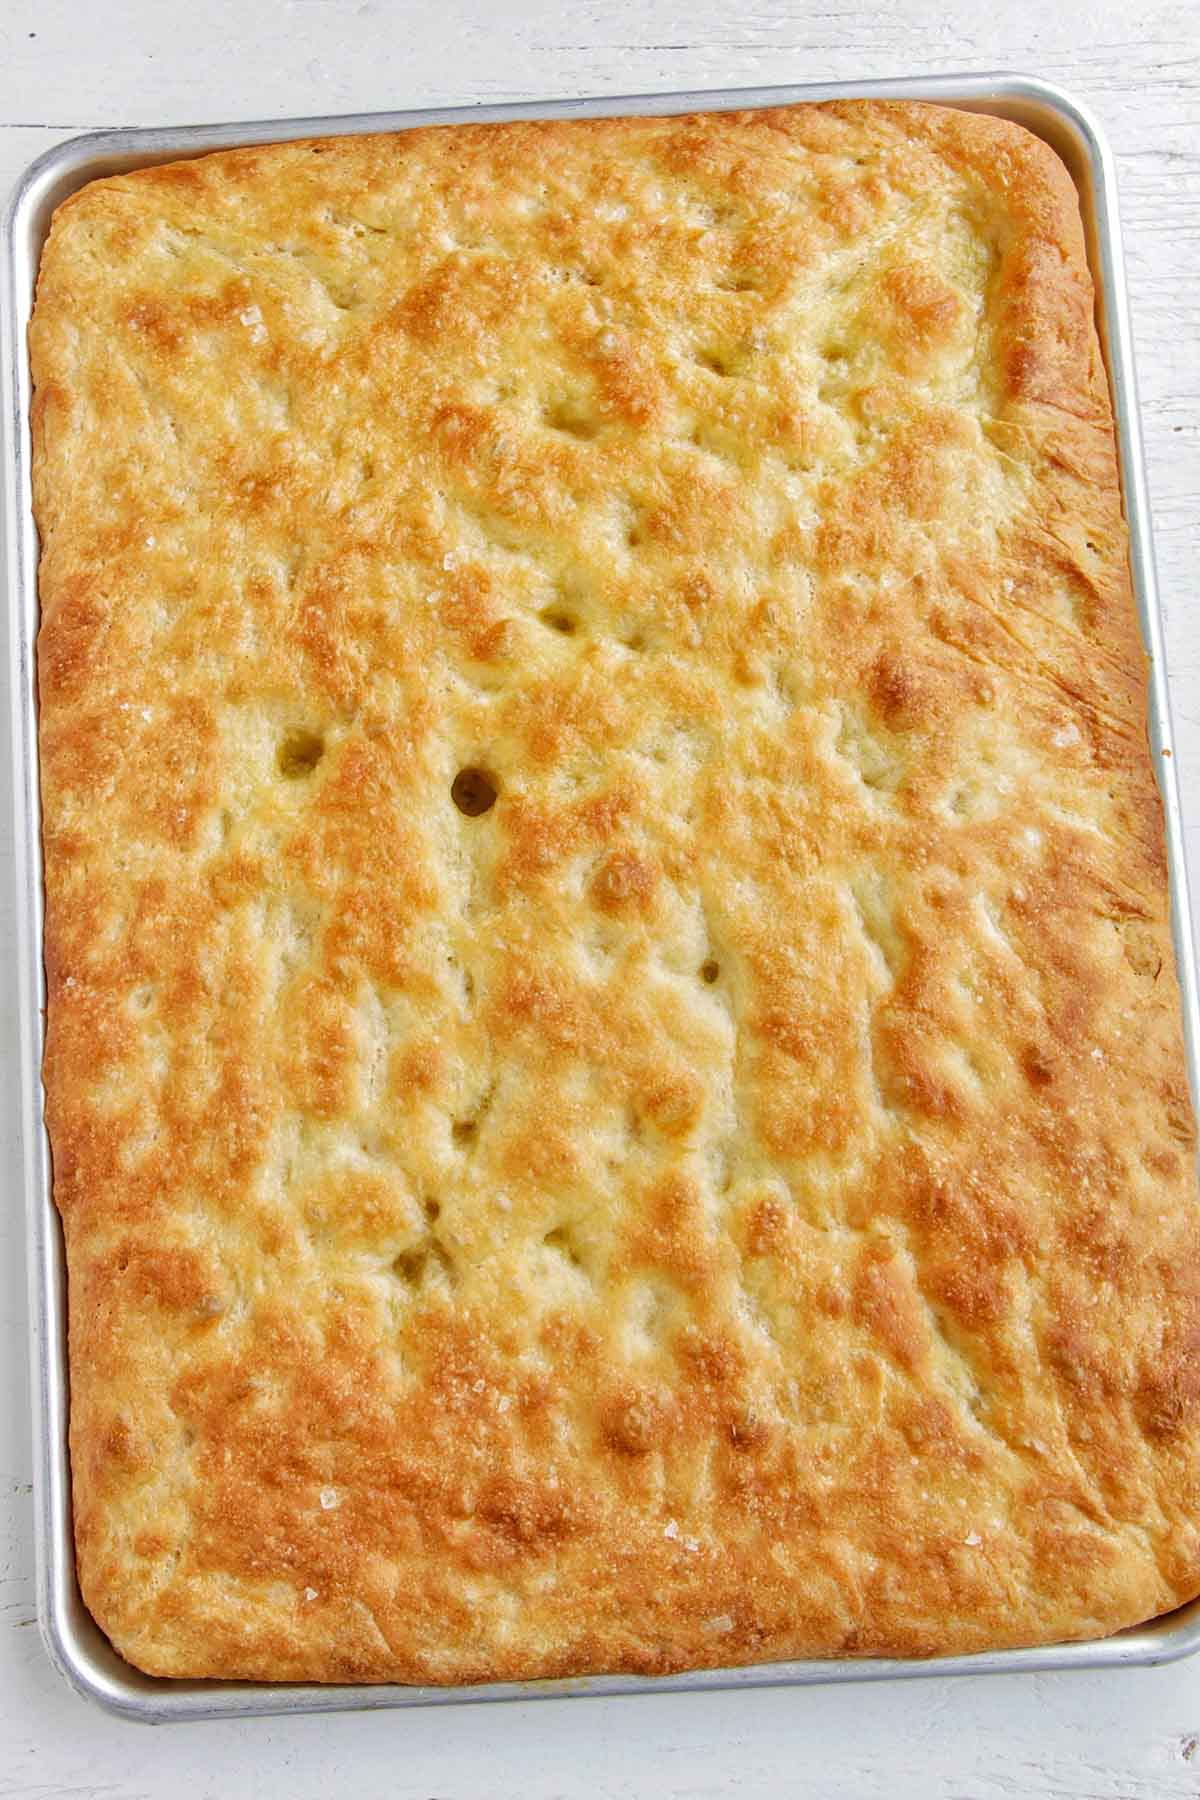 pan of baked focaccia bread.